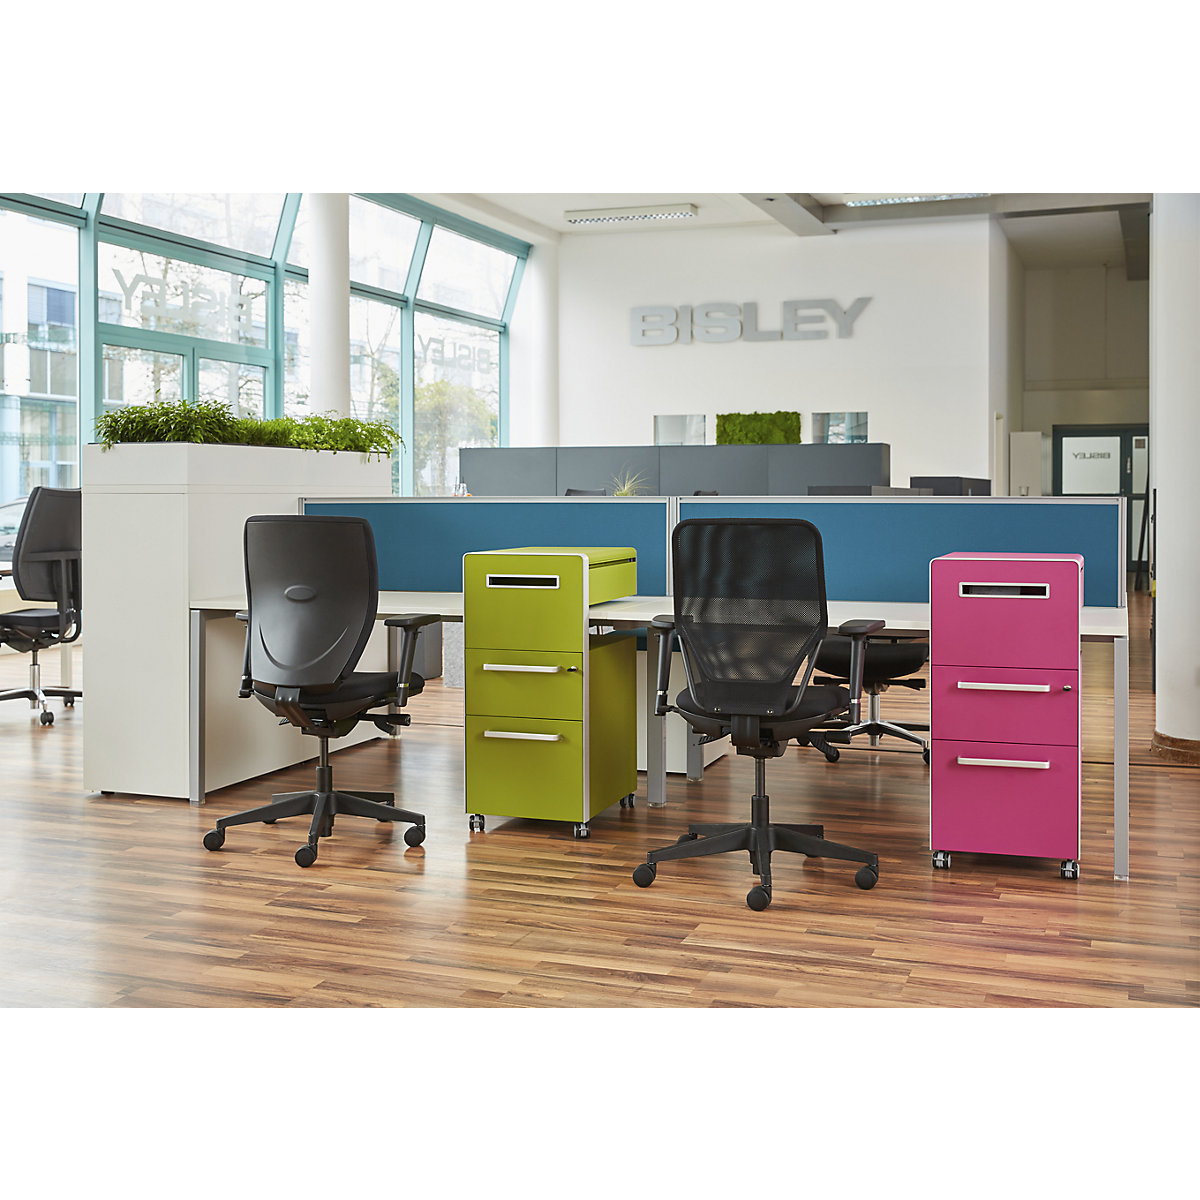 Bite™ pedestal furniture, with 1 whiteboard, opens on the right side – BISLEY (Product illustration 3)-2